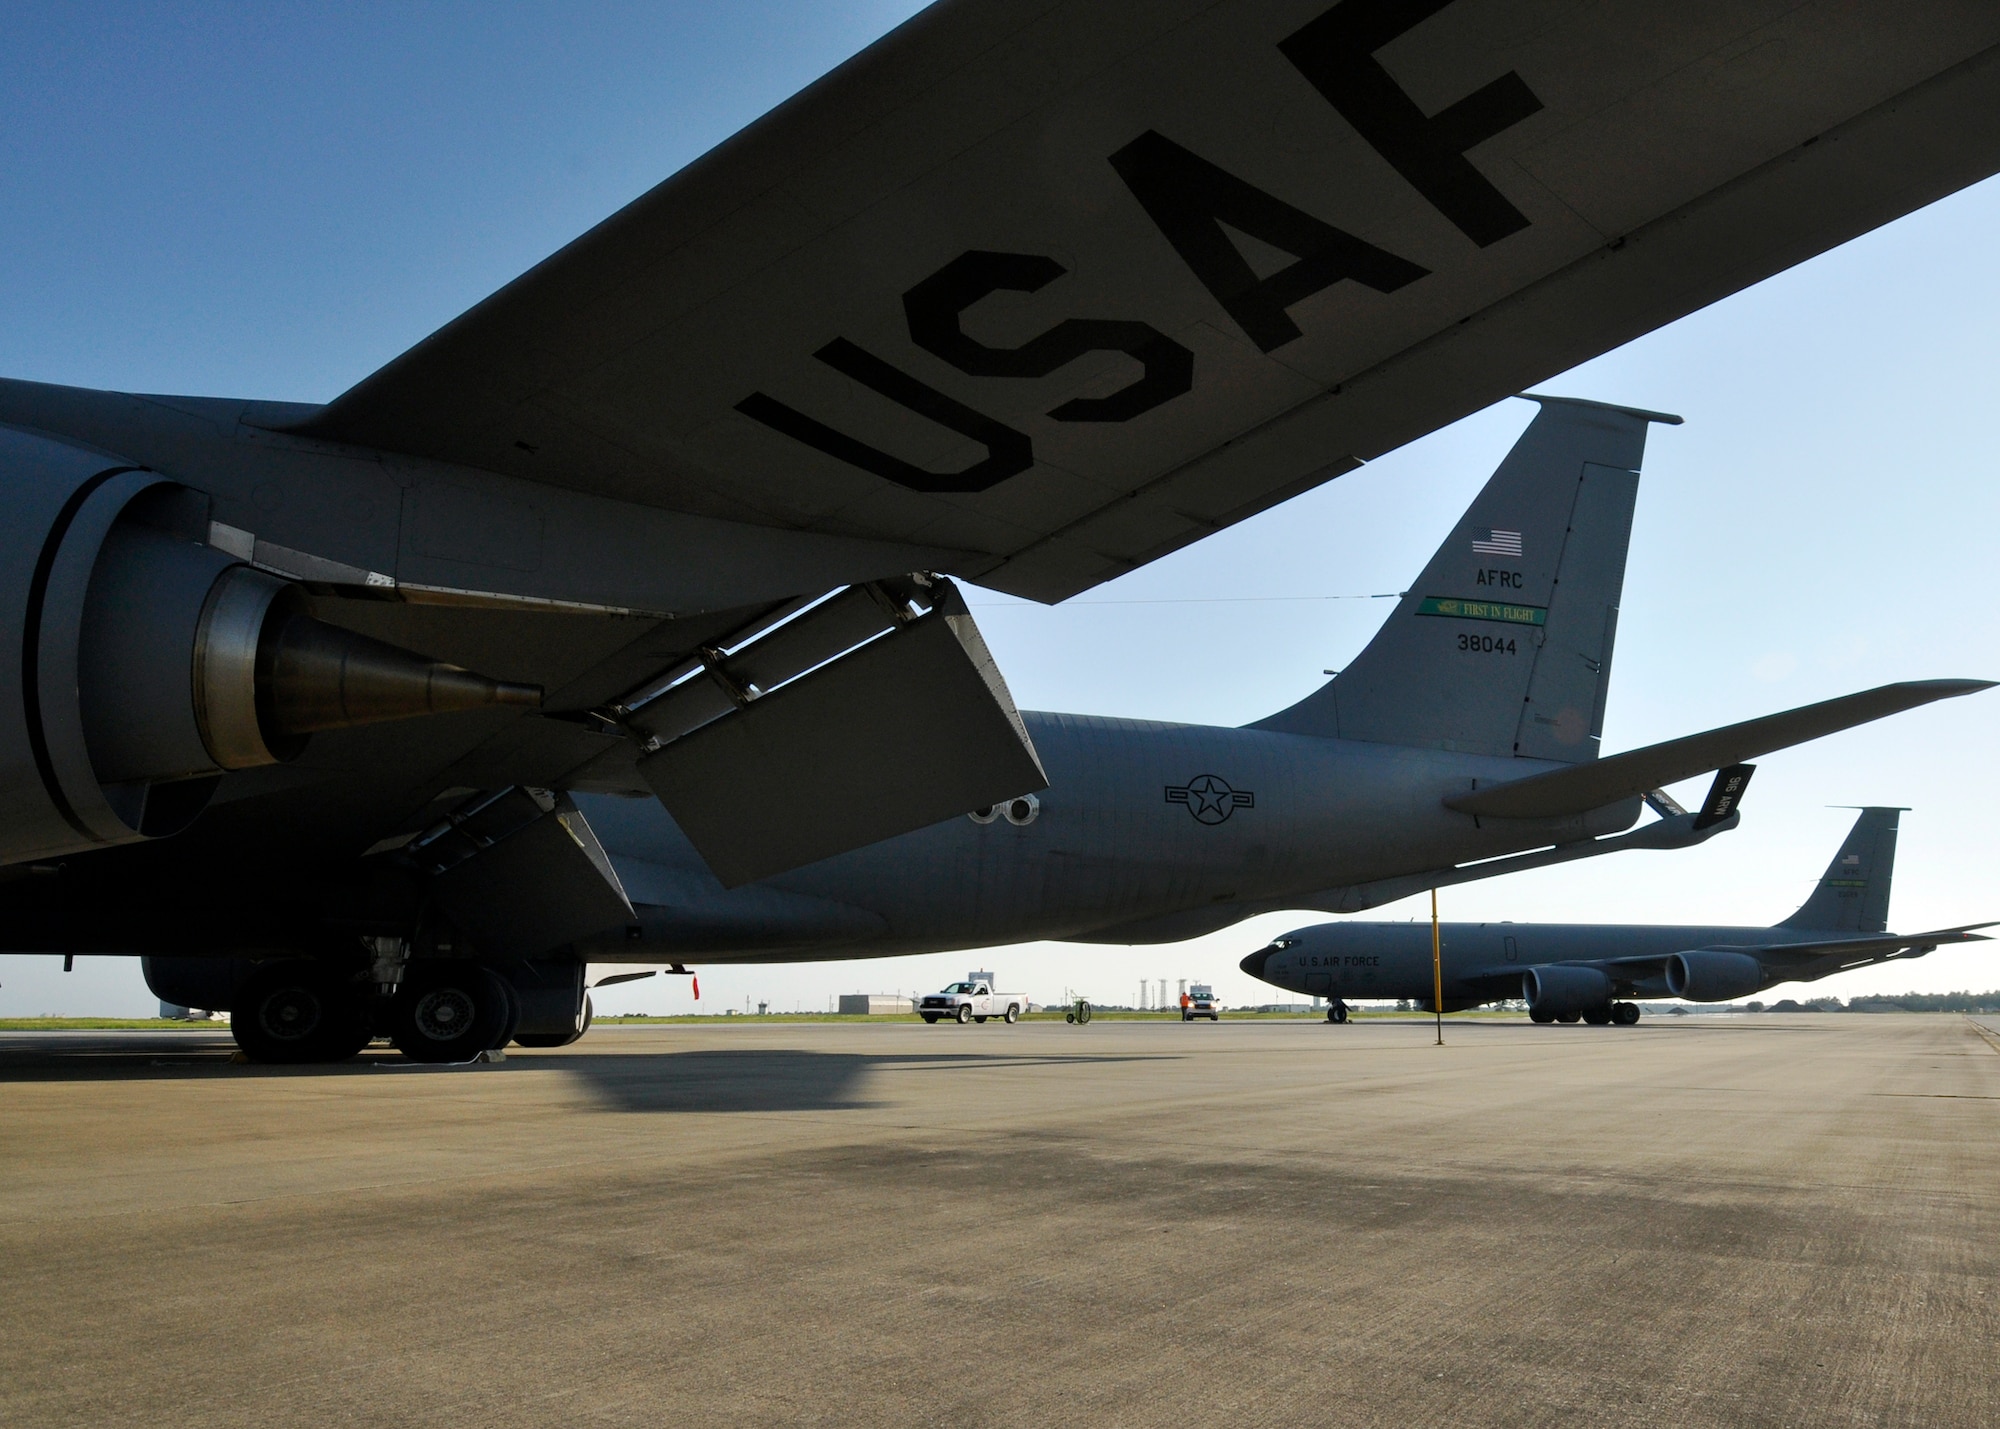 A 916th Air Refueling Wing KC-135 Stratotanker pulls into place beside of another tanker at Eglin Air Force Base Fla., Sept. 1  Their arrival was as part of a hurricane evacuation from Seymour Johnson AFB, N.C.  Approximately 30 F-15E Strike Eagles, three KC-135s and 300 personnel arrived to beddown the aircraft as Hurricane Earl headed for the N.C. coast.  The 33rd Fighter Wing, a former F-15 unit now the training wing for the F-35 Lightning II, provided flightline space for the aircraft.  (U.S. Air Force photo/Samuel King Jr.)